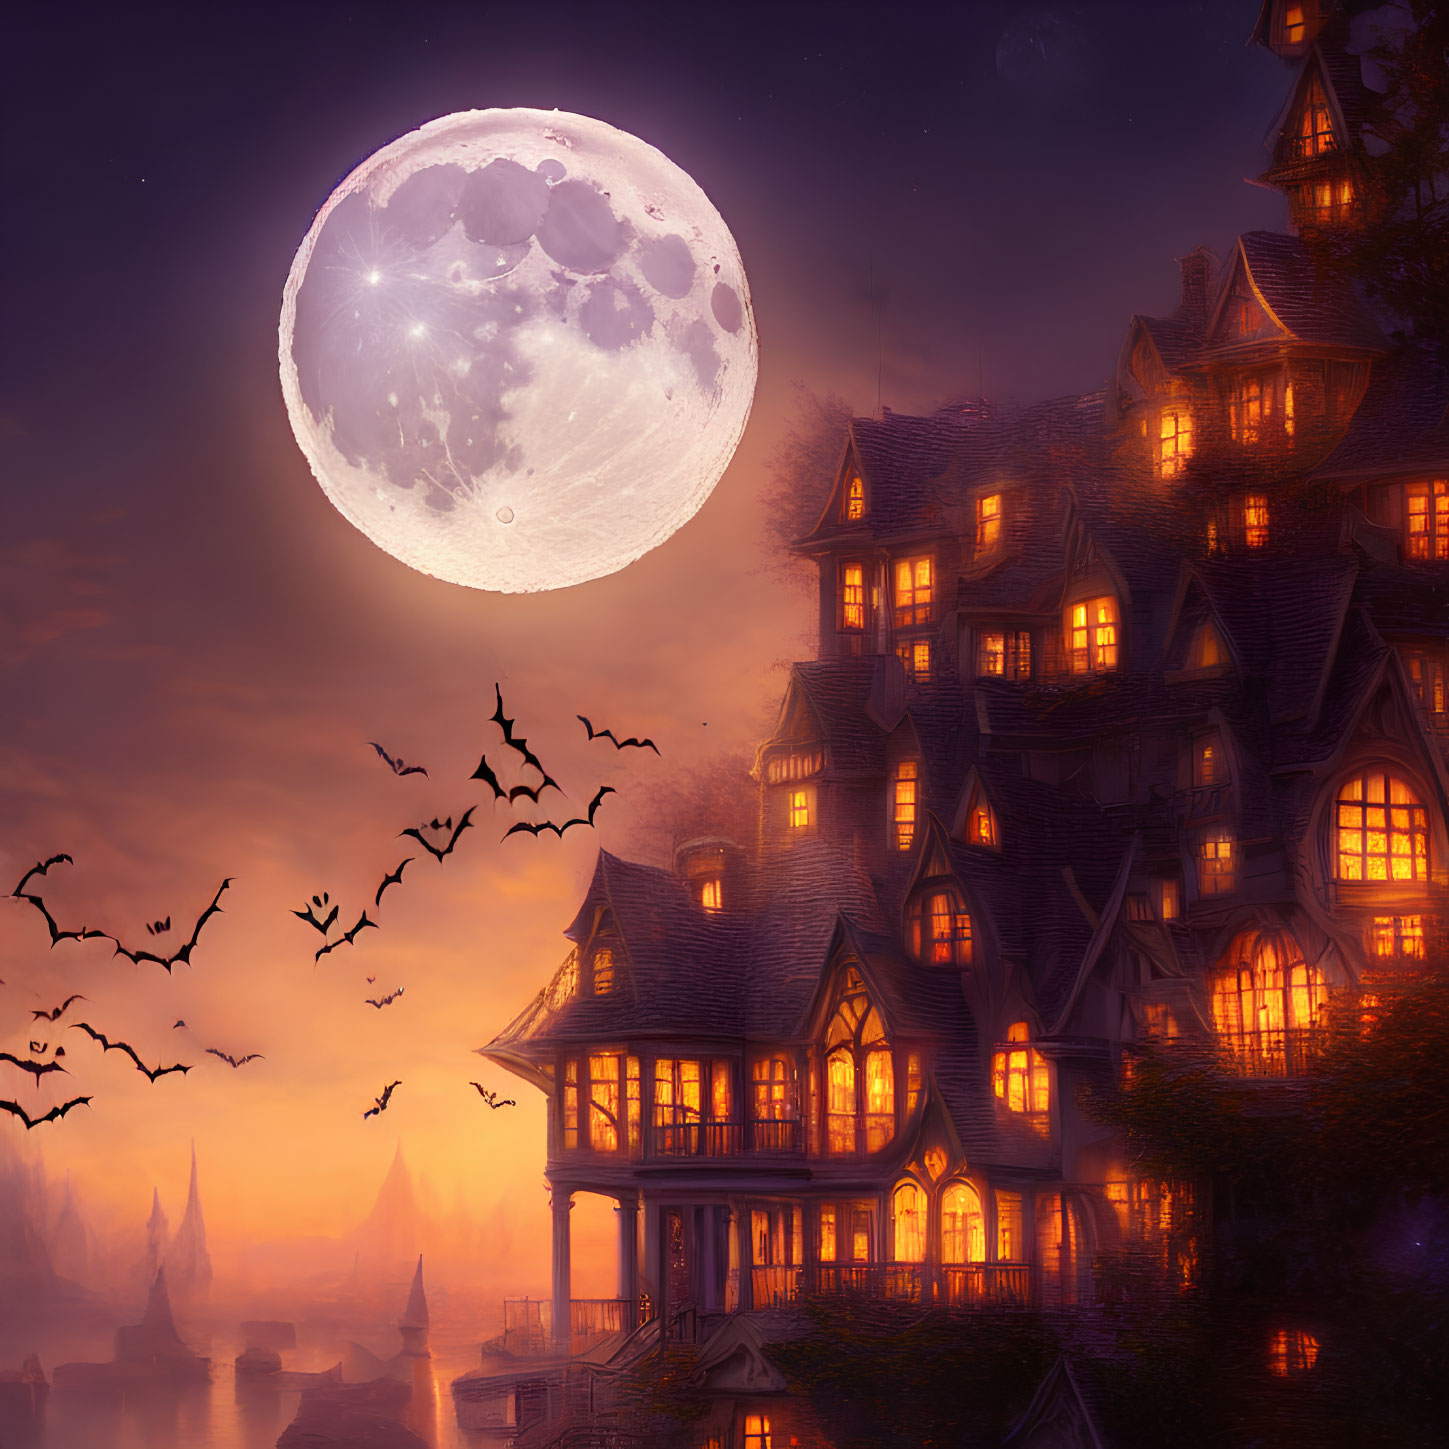 Gothic mansion under full moon with flying bats